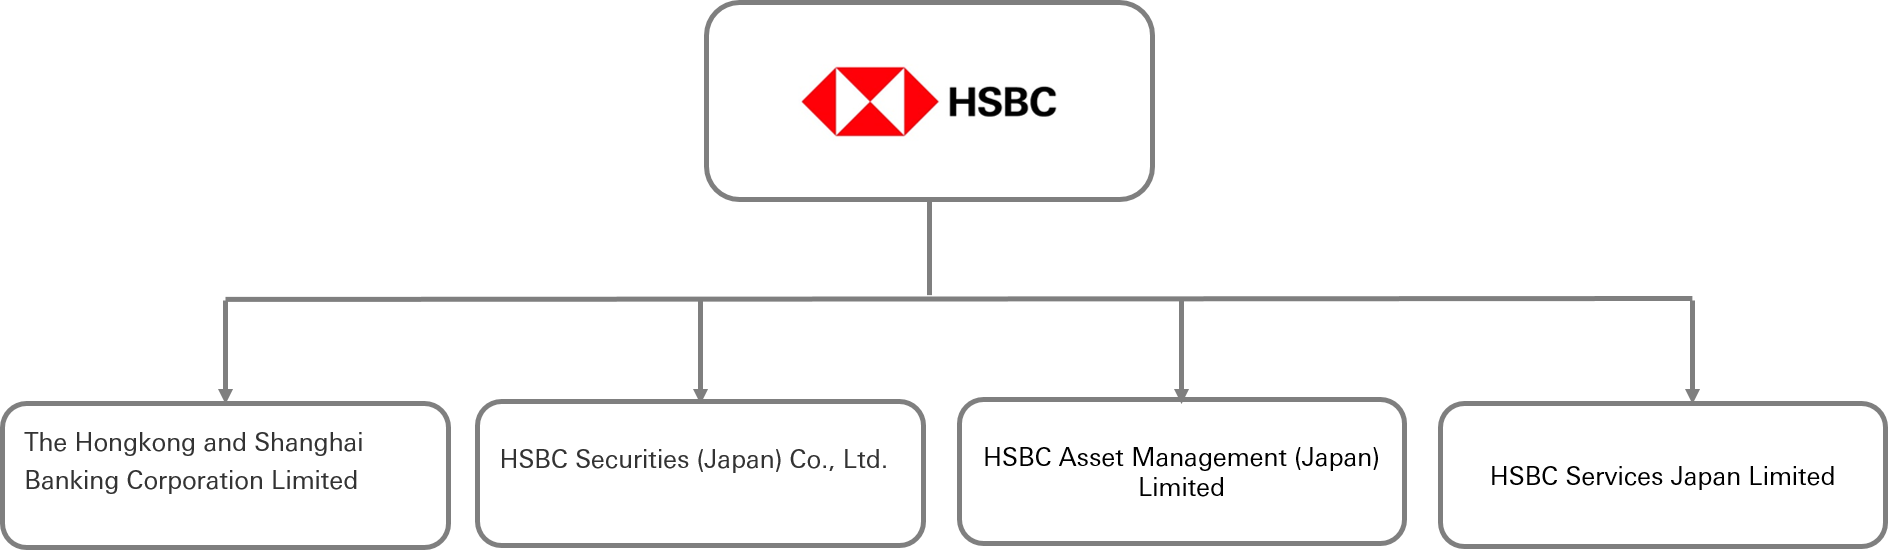 The Hongkong and Shanghai Banking Corporation Limited, HSBC Securities (Japan) Limited, HSBC Global Asset Management (Japan) and HSBC Services Japan Limited